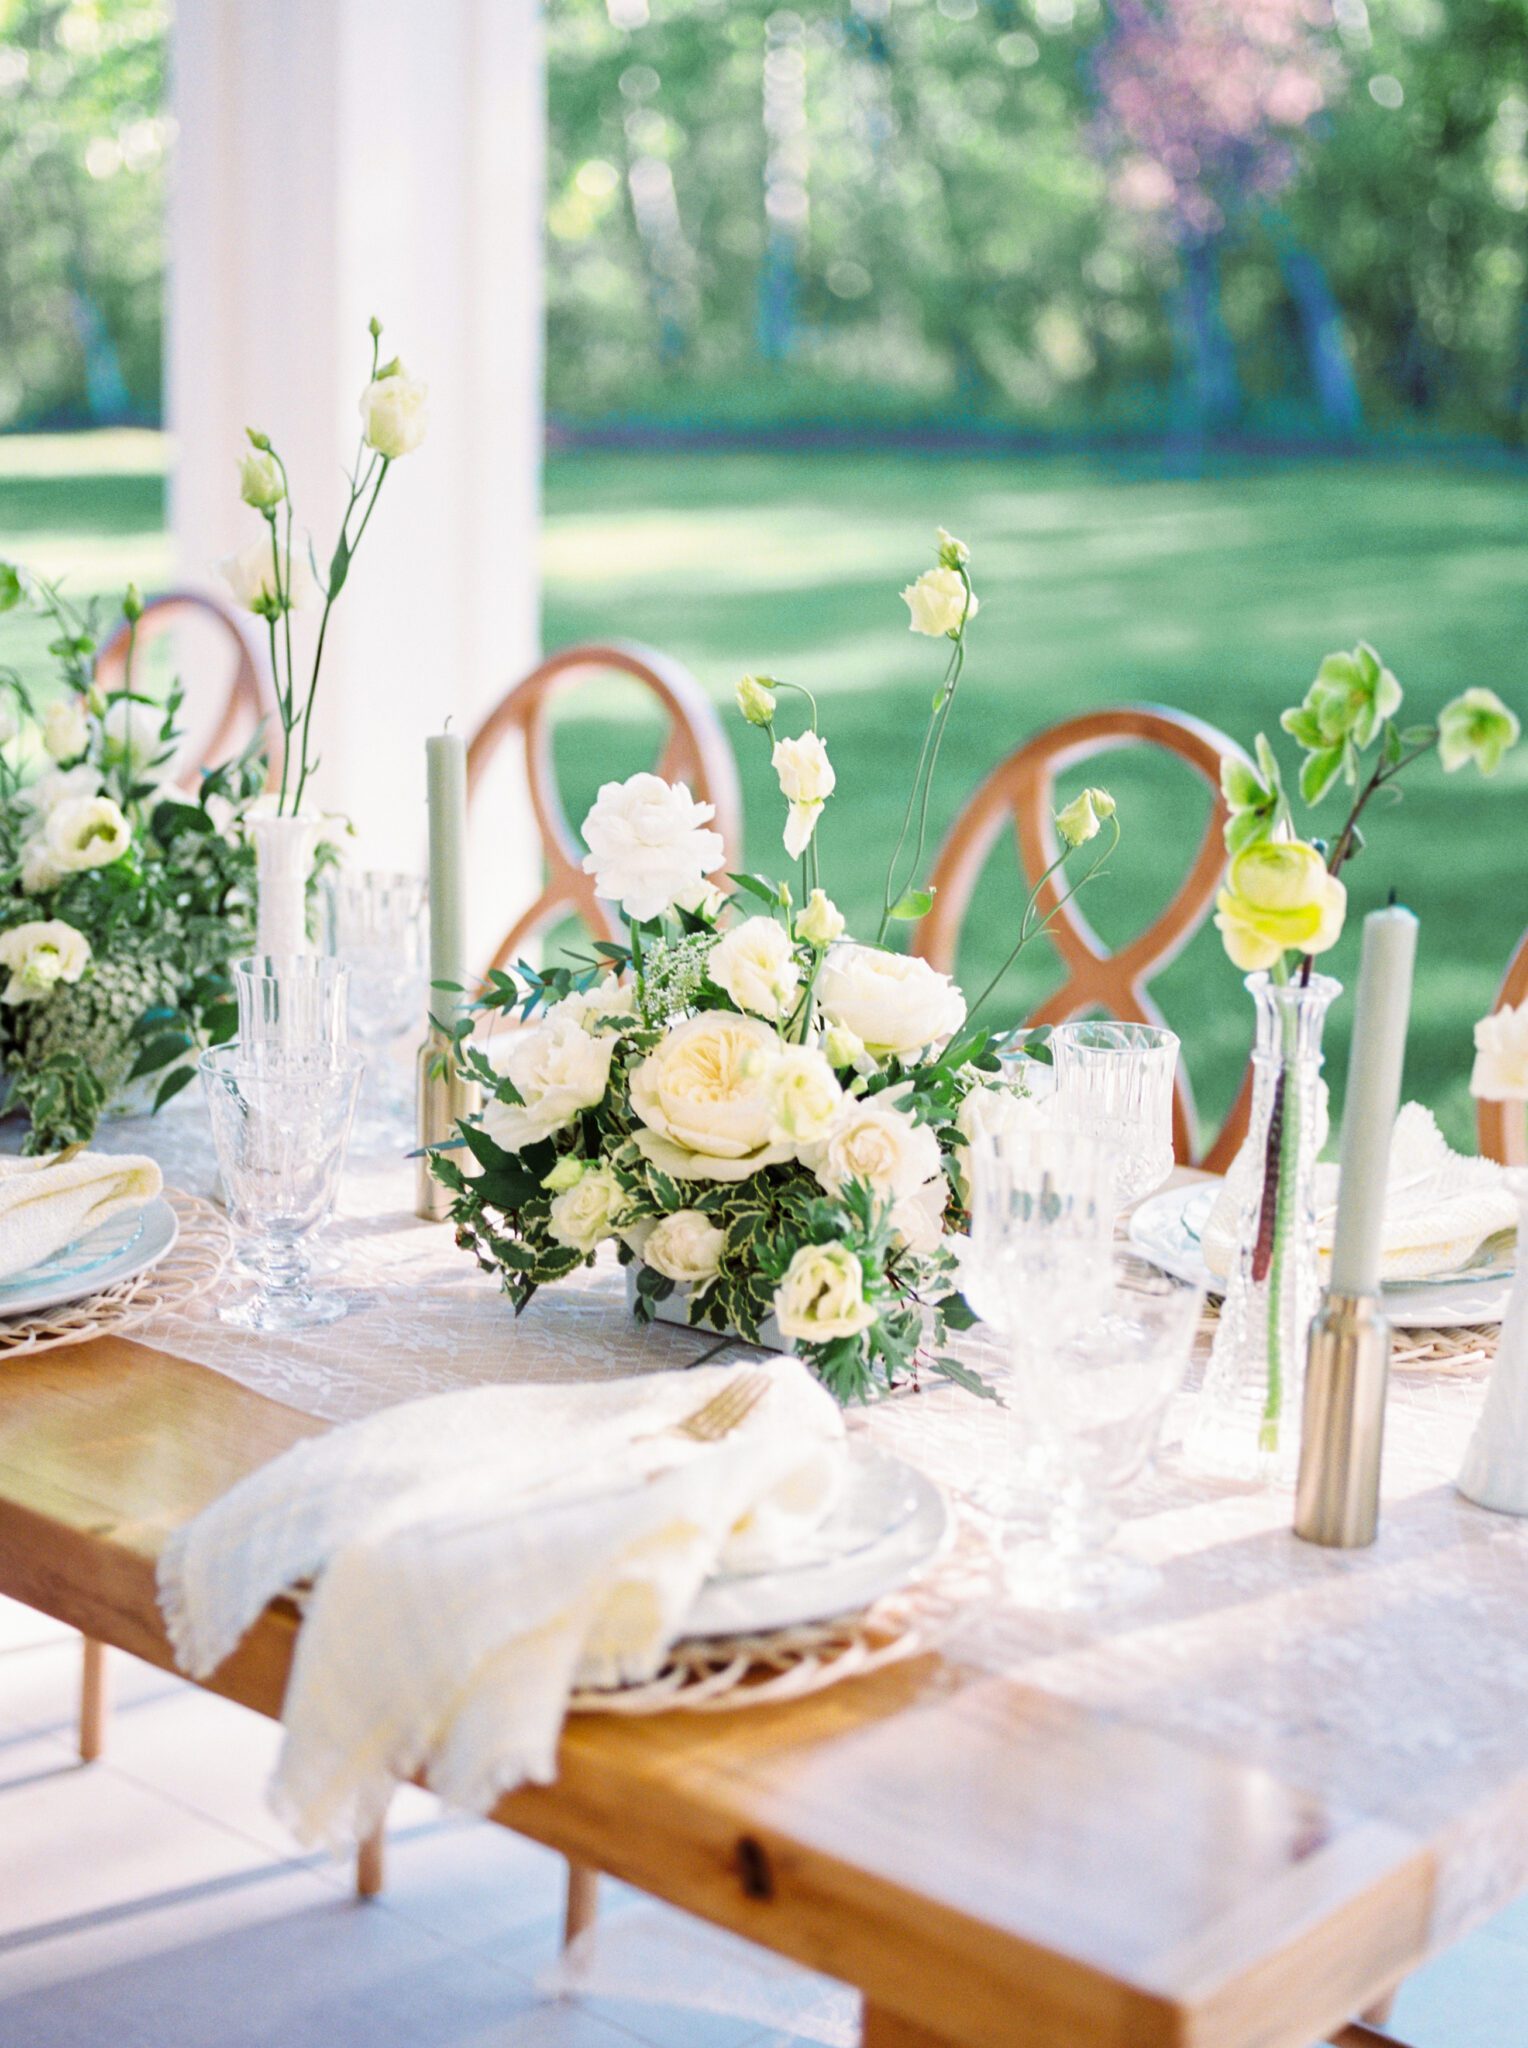 Cottage core inspired wedding reception at Sparrow Lane Weddings and Events venue near Edmonton, Alberta. Fine art summer wedding. Wooden infinity chairs, outdoor summer wedding tablescape with lush florals in pale yellow, ivory and white with greenery. 